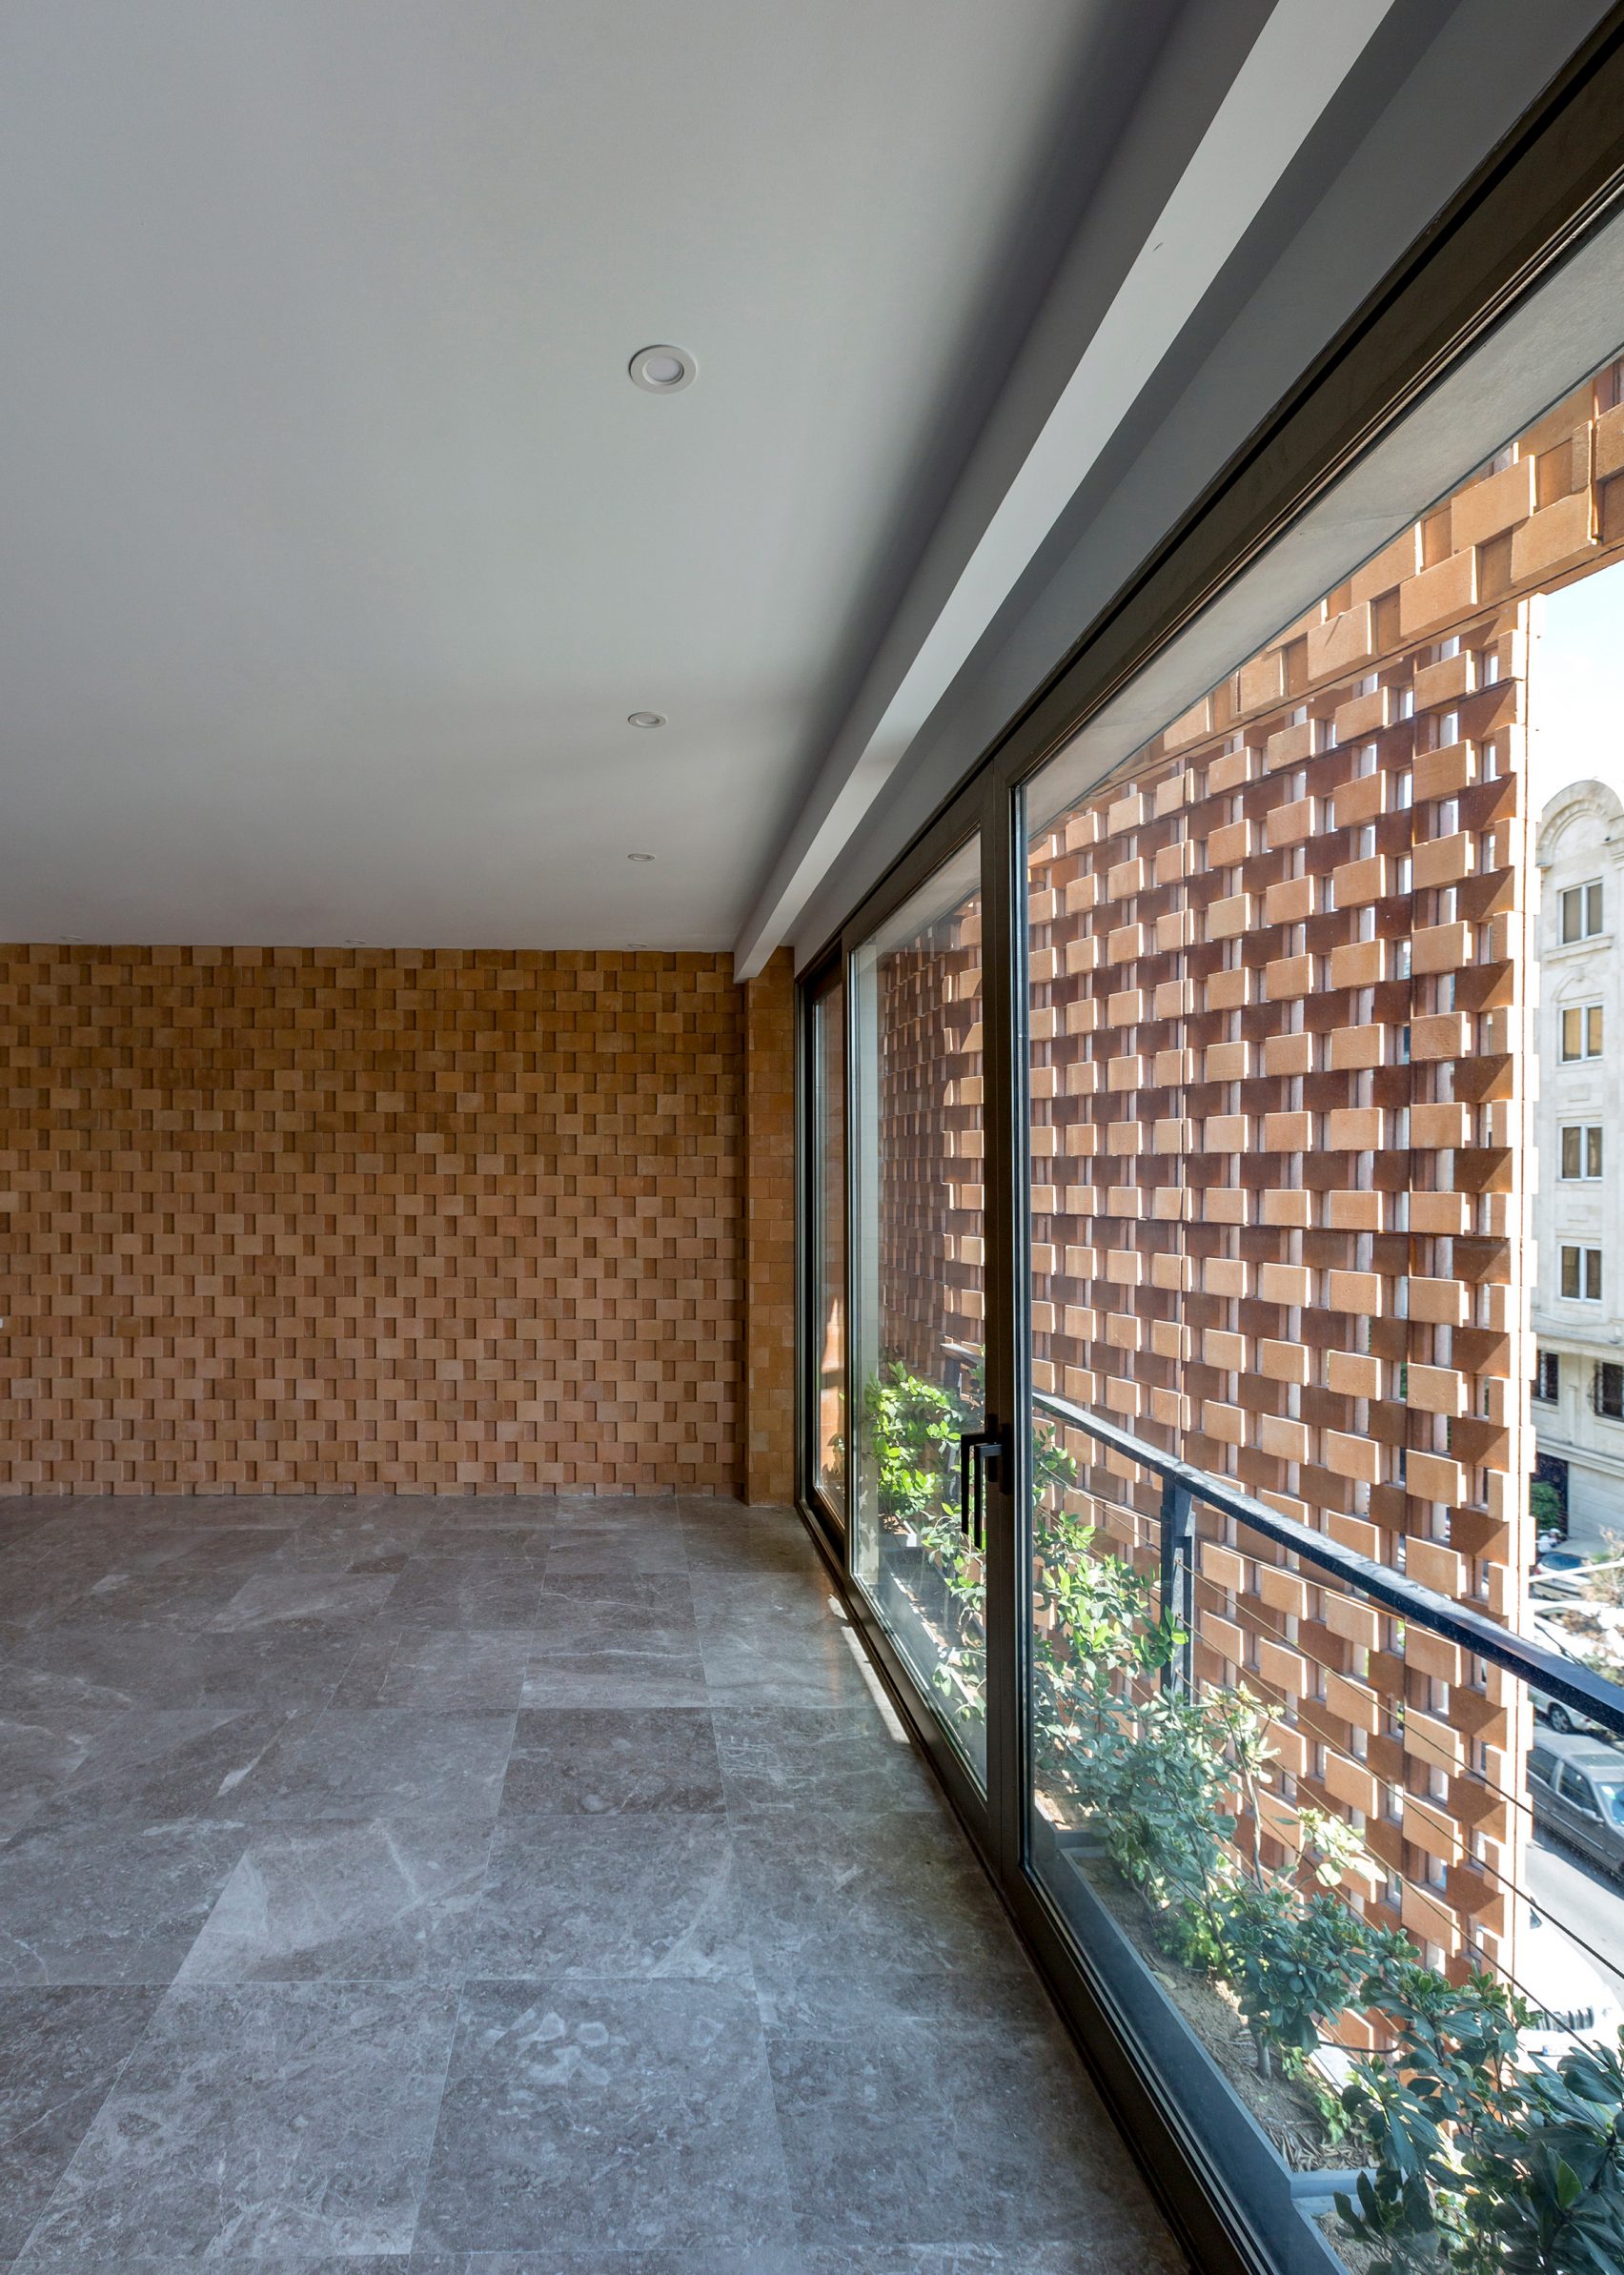 saadat-abad-residential-building-fundamental-approach-architects-